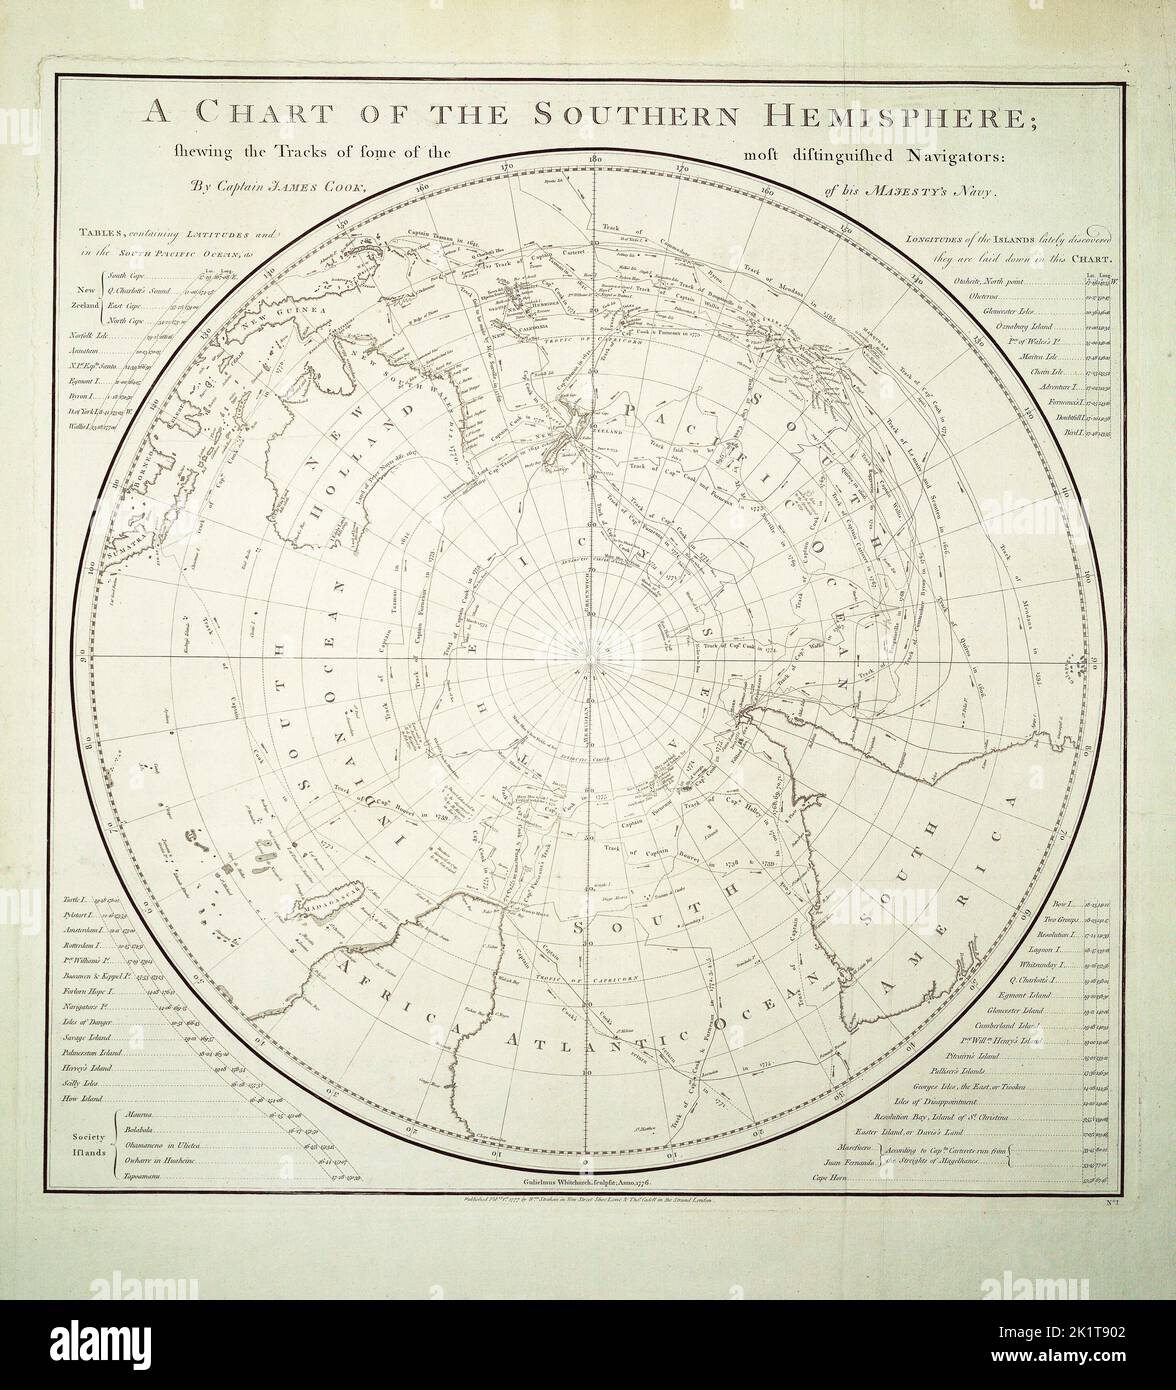 A chart of the southern hemisphere; shewing the tracks of some of the most distinguished navigators: by Captain James Cook, of His Majesty's navy.Single sheet, engraving. Polar projection. The chart shows the tracks of Mendana in 1595, Quiros in 1606, Le Maire & Schouten in 1616, Tasman in 1642, Halley in 1700, Roggewein in 1722, Bouvet in 1738-39, Byron in 1765, Wallis in 1767, Bougainville in 1768, Surville in 1769, and Cook's first and second voyages. Tables in the corners contain the latitudes and longitudes of the islands lately discovered in the South Pacific Ocean, as they are laid down Stock Photo